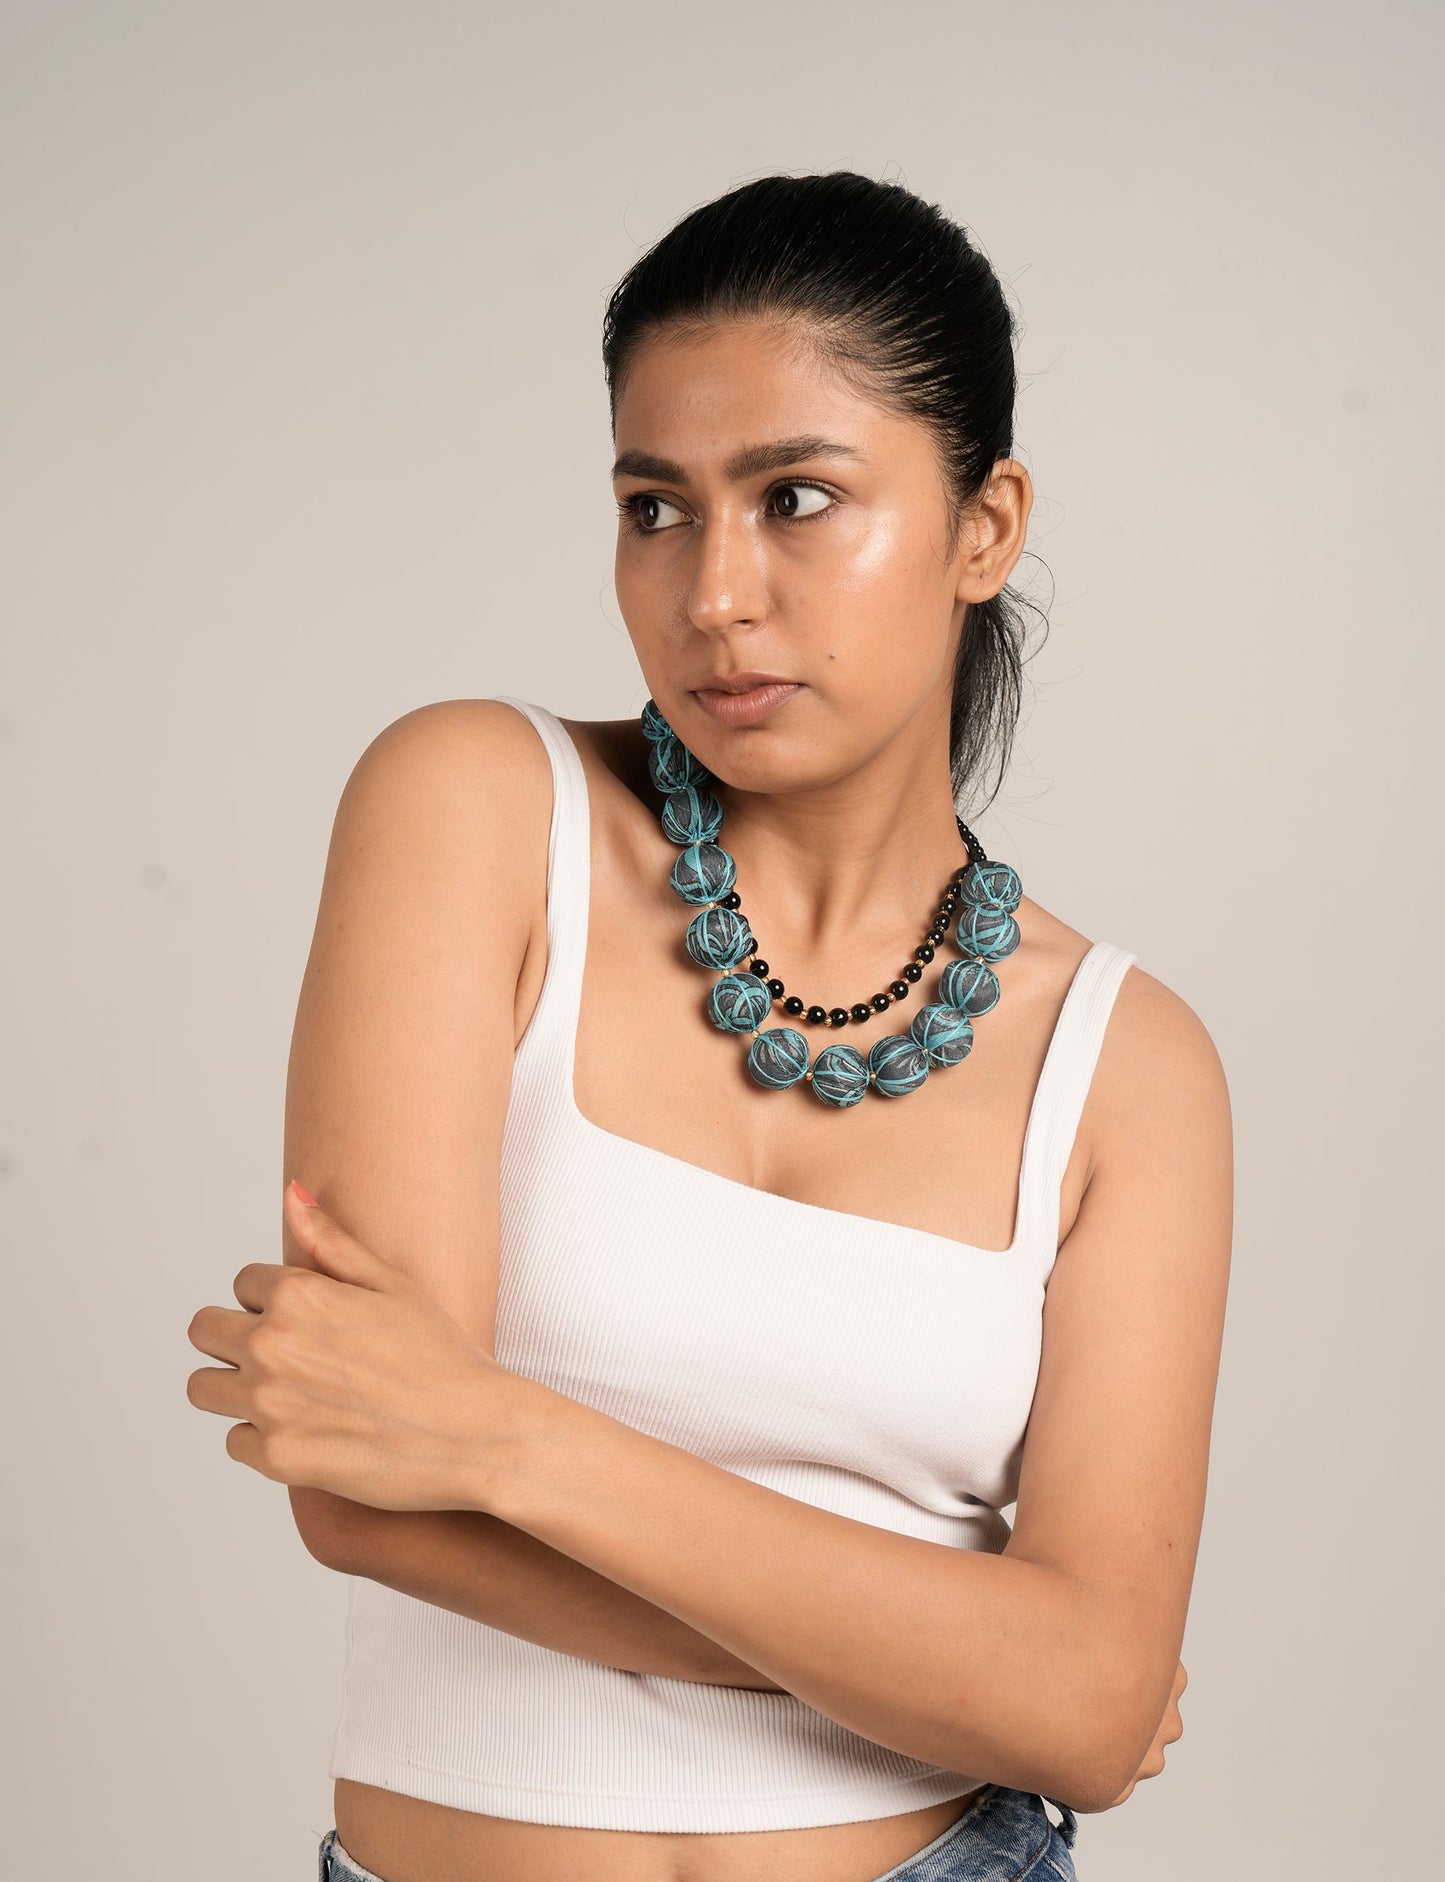 Make a sustainable statement with our UP-CYCLED DOUBLE BEADED CHOKER. Muskmelon-inspired beads, upcycled from waste fabric and hand-wrapped in pre-loved saris, create a unique blend. Small glass beads add elegance. Hypoallergy tested metal hooks, skin-friendly, nickel, and lead-free. Explore the world of upcycled fashion.